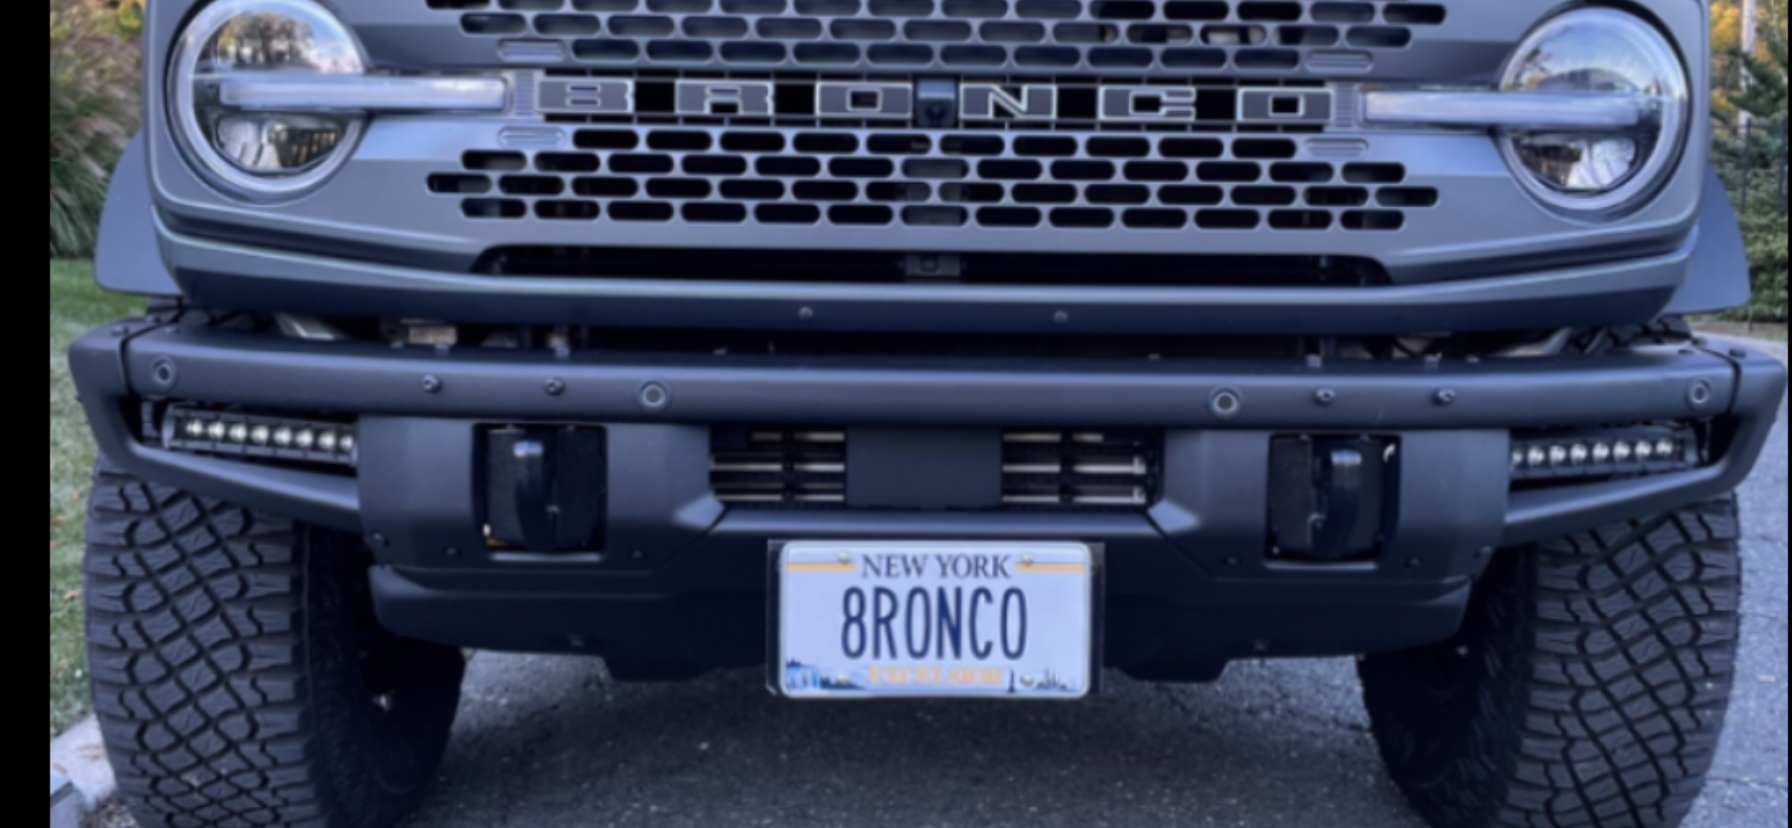 Ford Bronco PRICE DROP -FRONT LICENSE PLATE BRACKETS For Your Bronco 2DBA3B9B-BD8A-4D6F-B956-8396772B2BF9